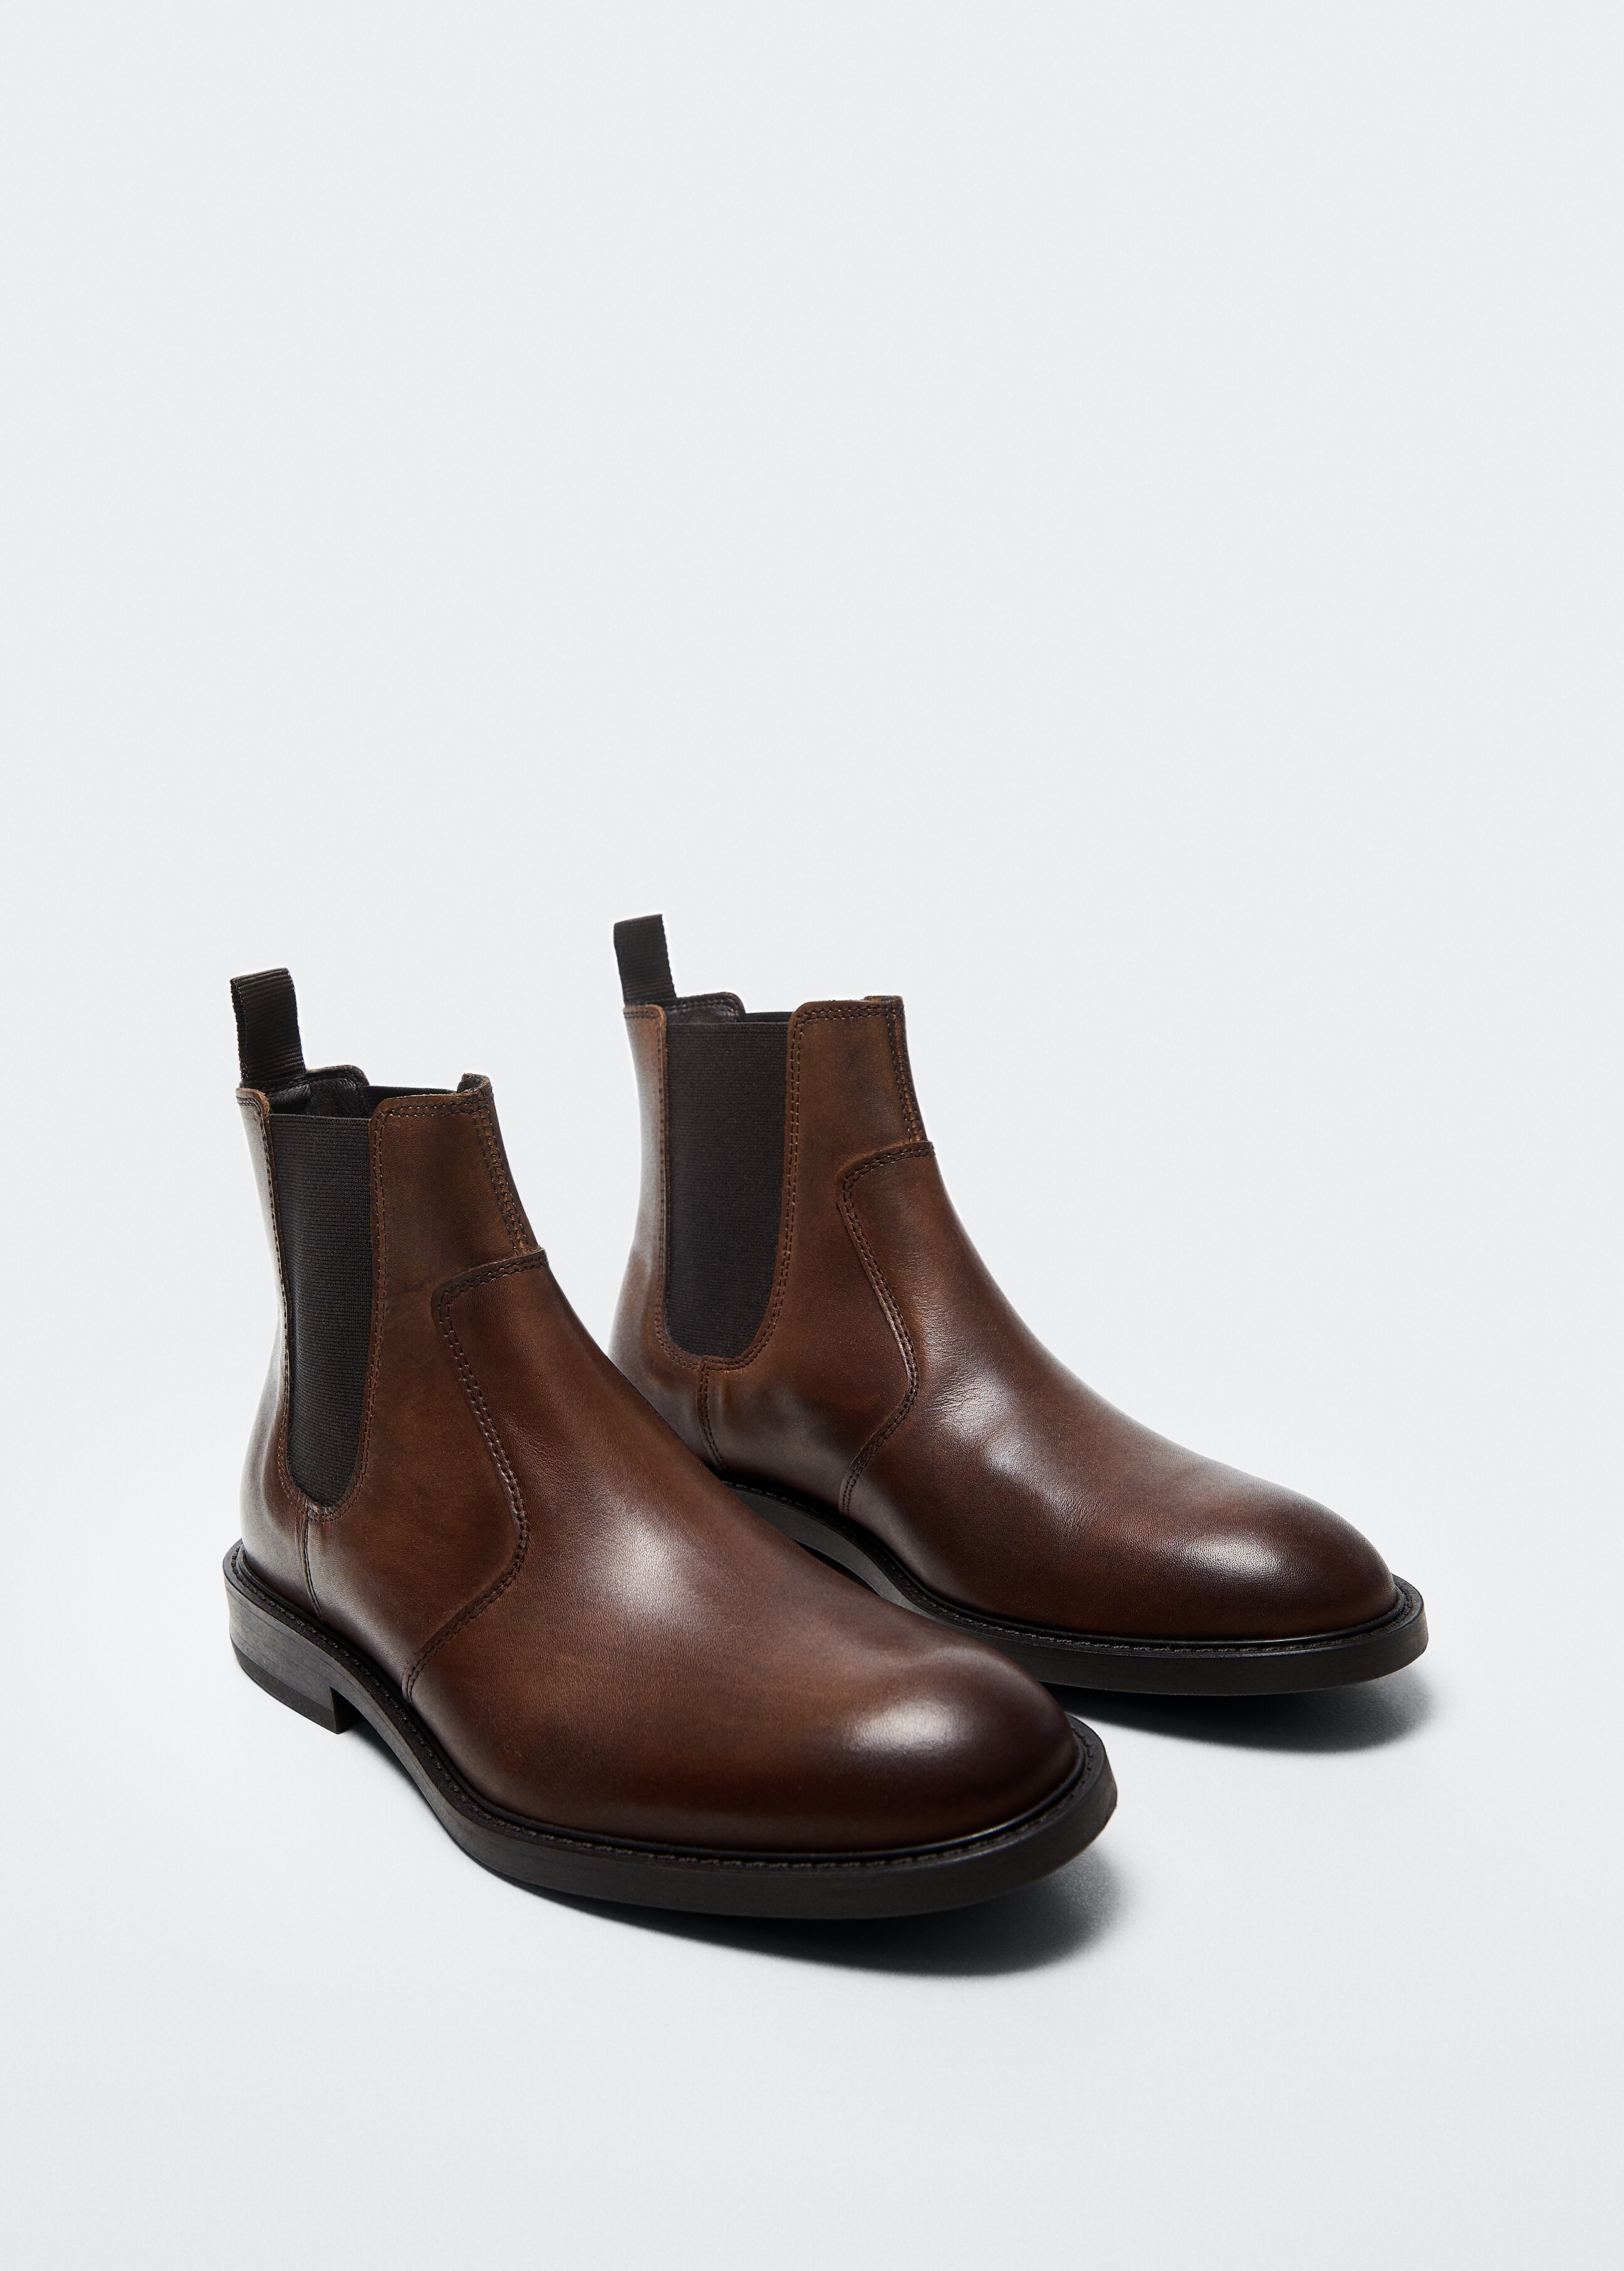 Leather Chelsea ankle boots - Medium plane